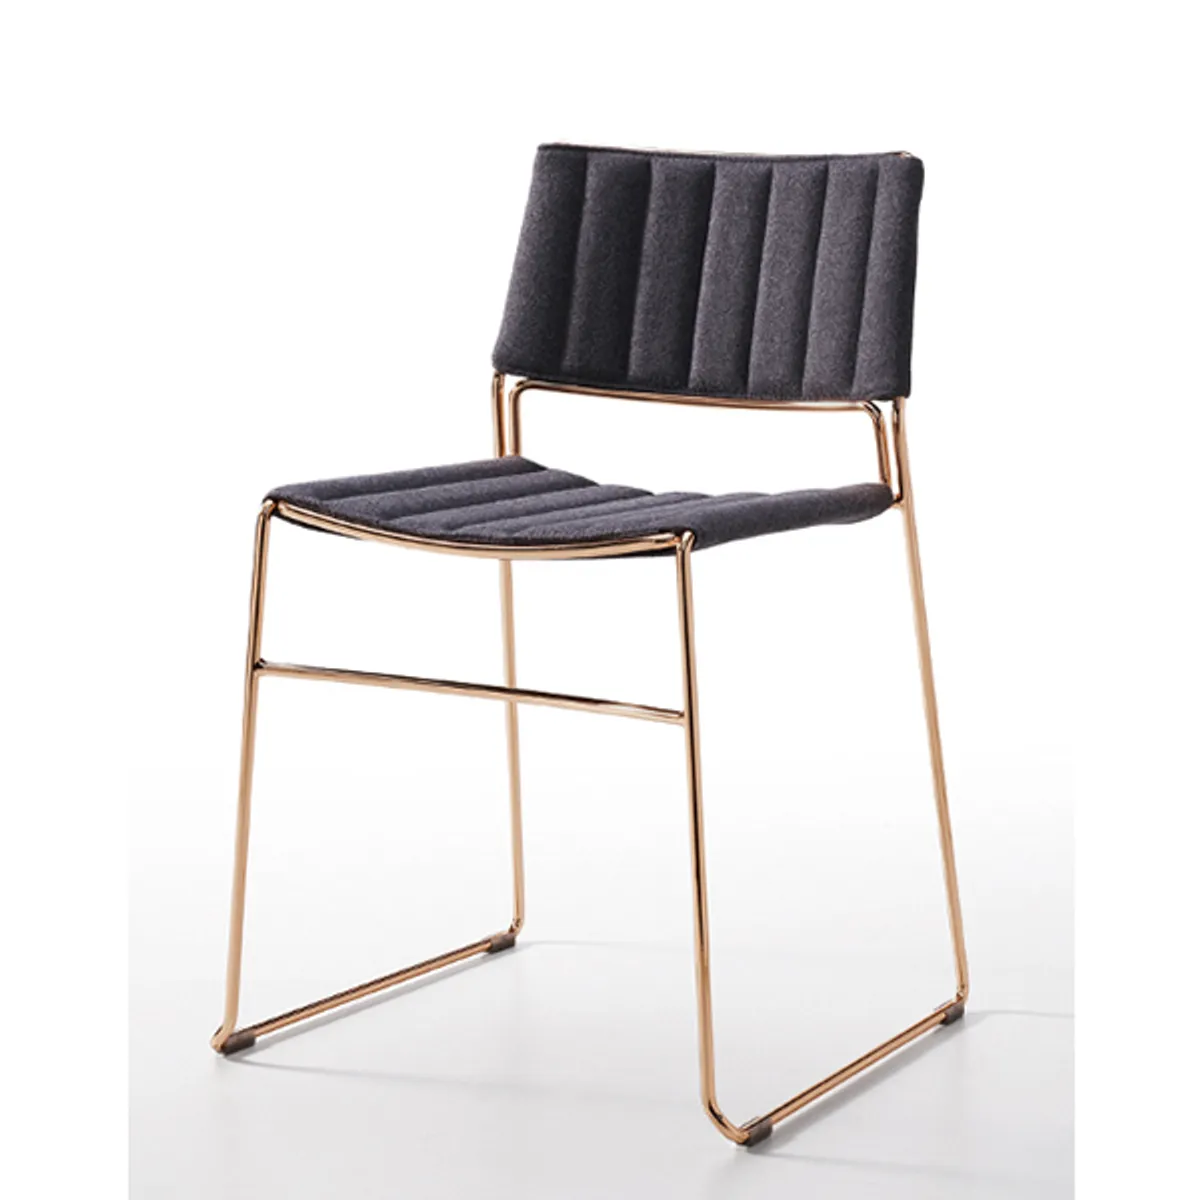 Honeycomb Uph Chair Rose Gold Inside Out Contracts 014